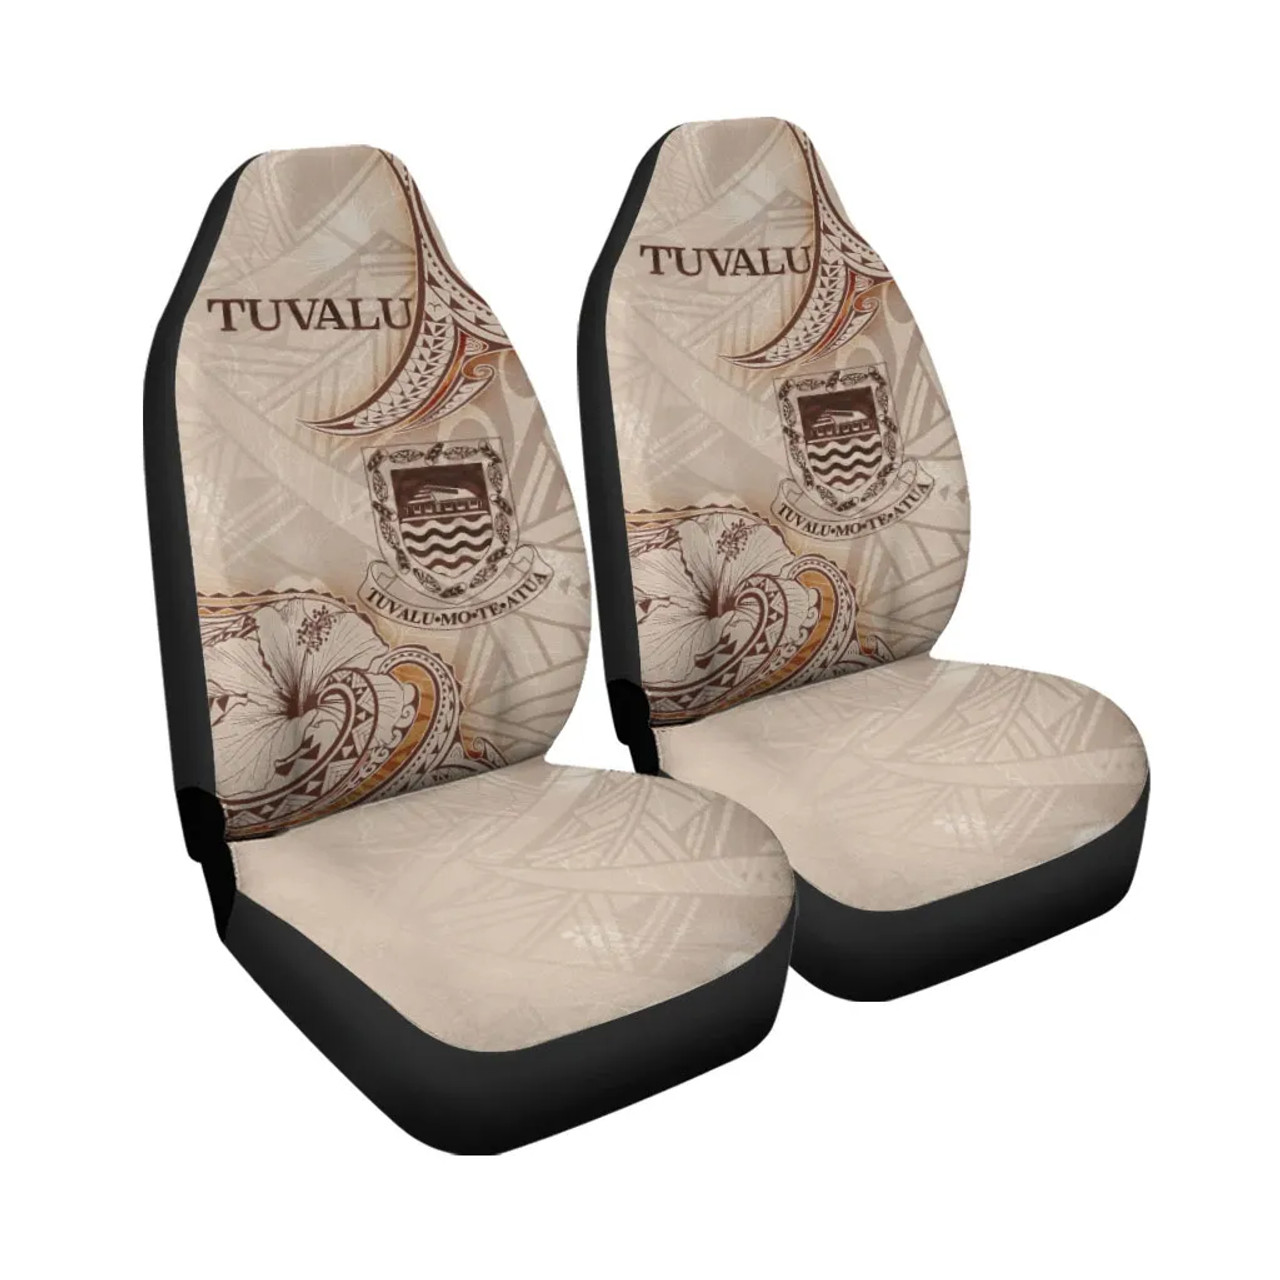 Tuvalu Car Seat Cover - Hibiscus Flowers Vintage Style